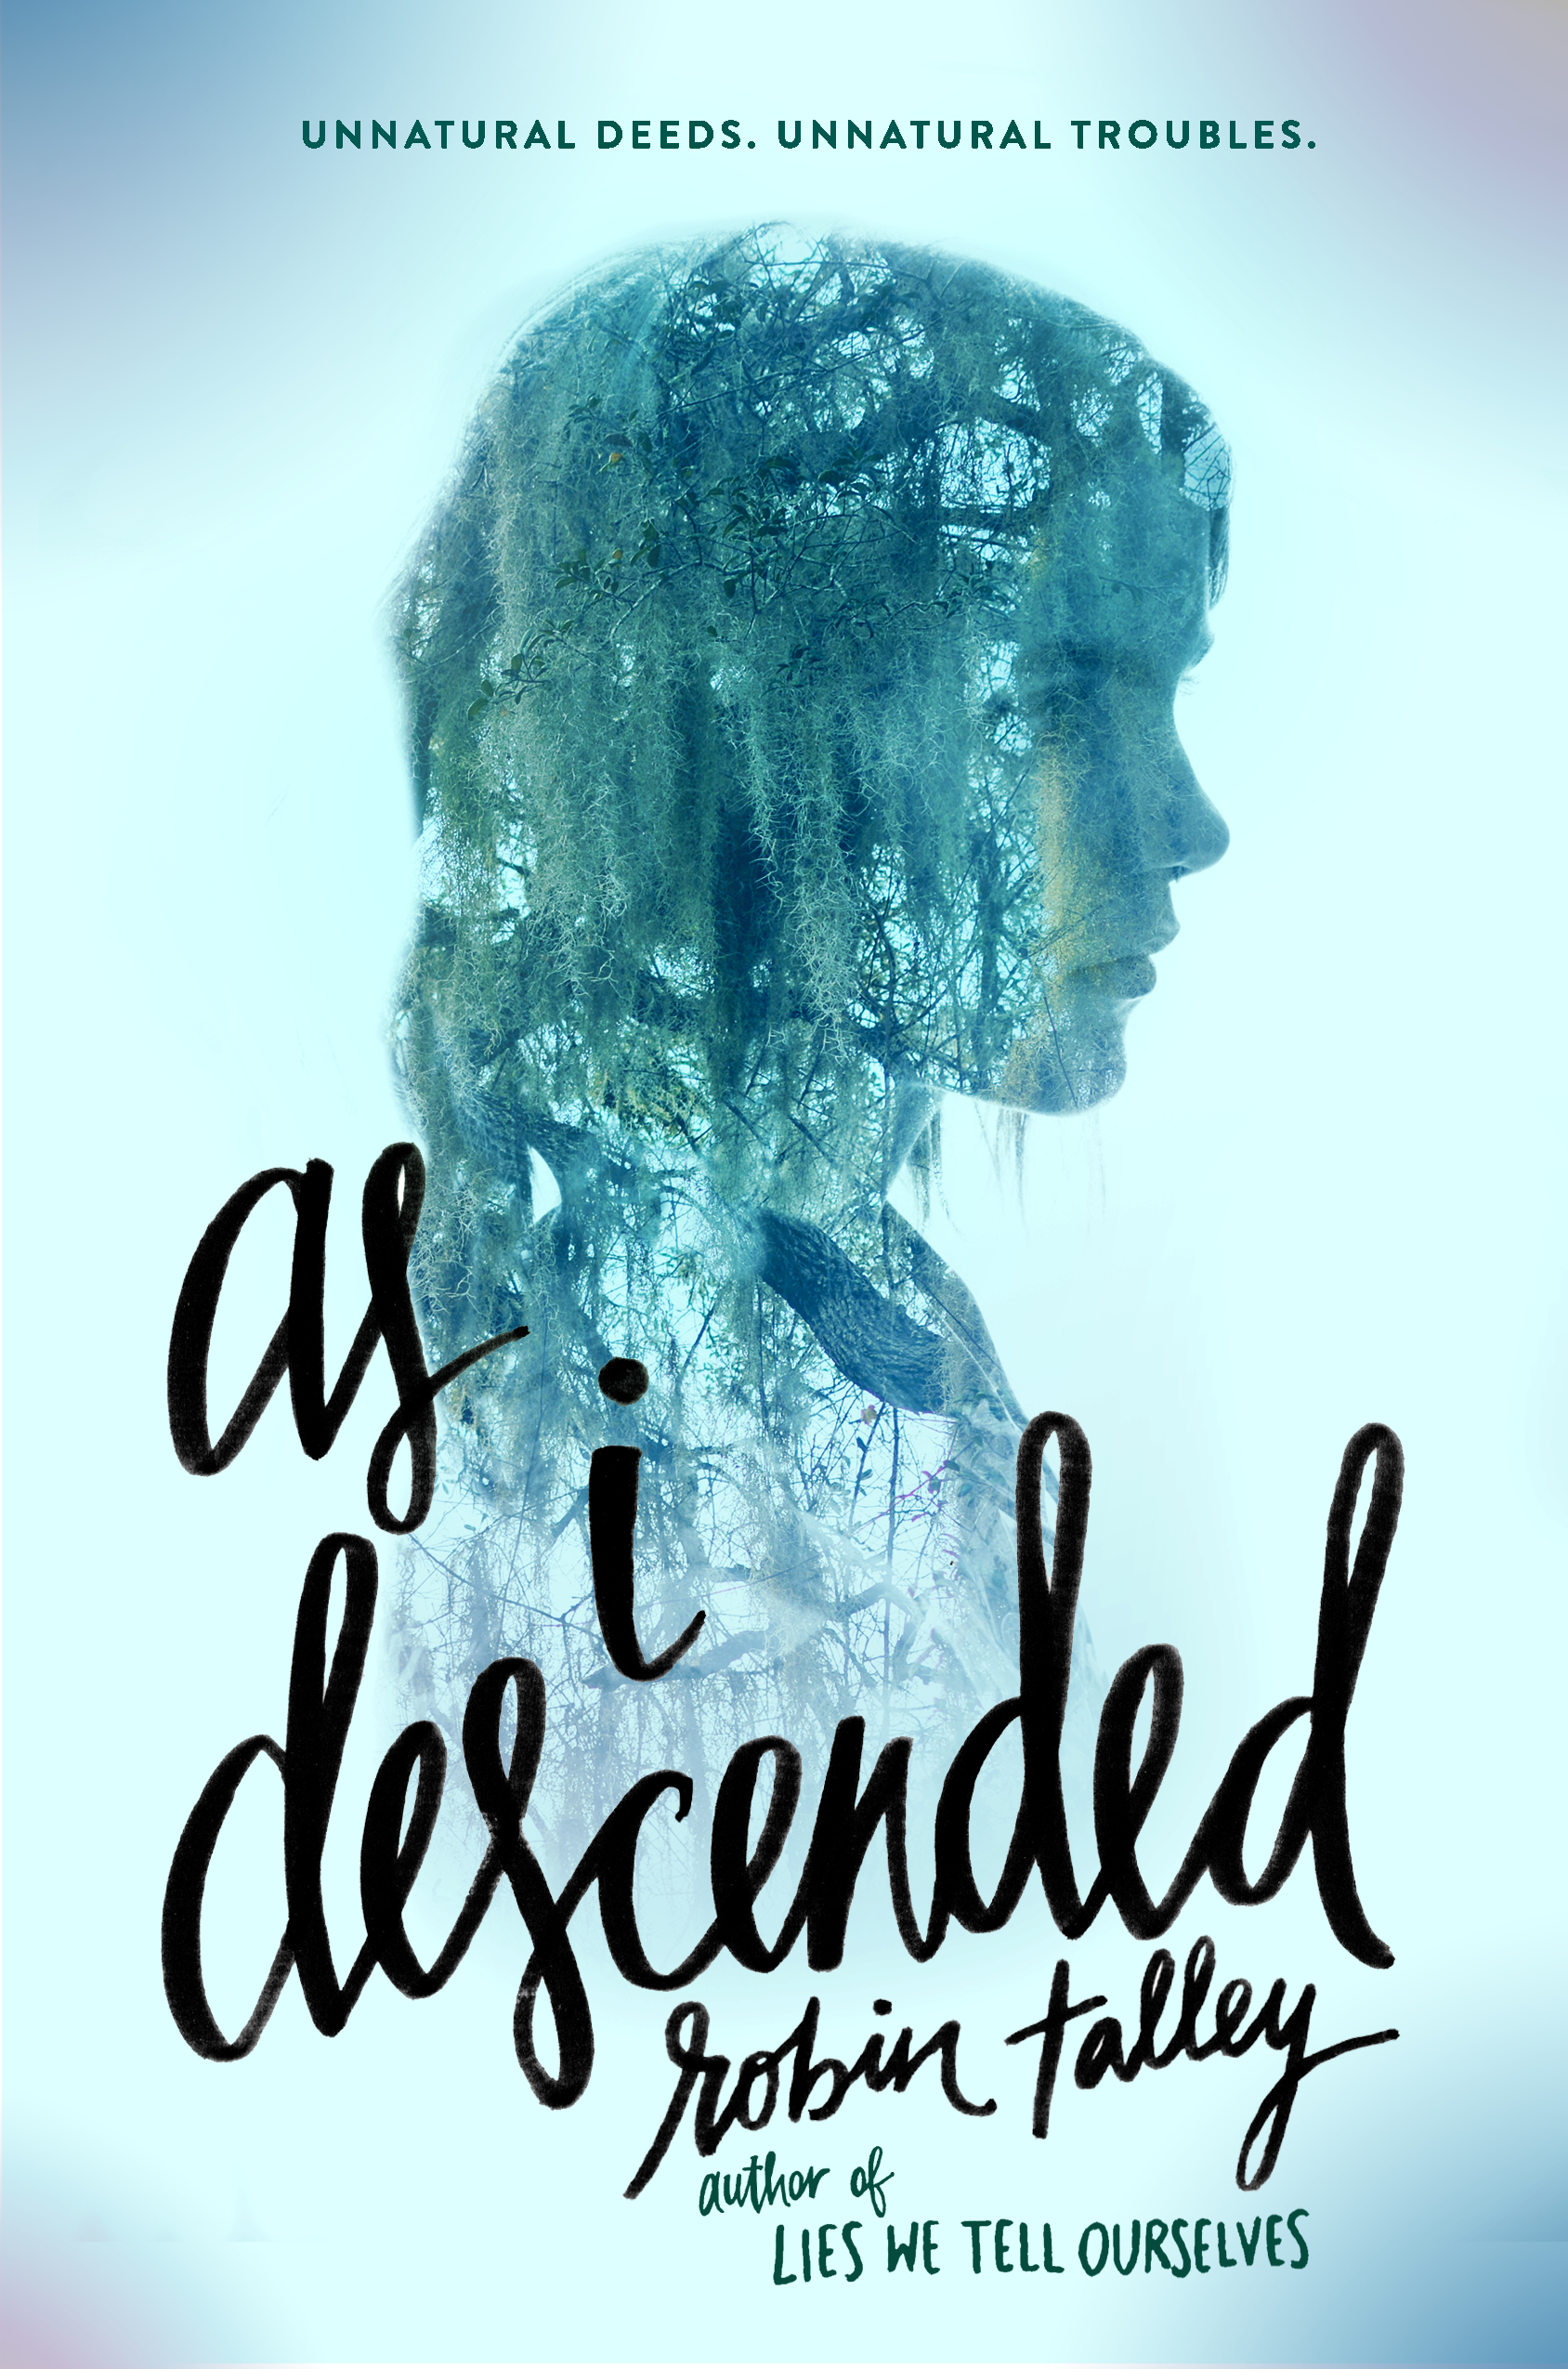 As I Descended cover